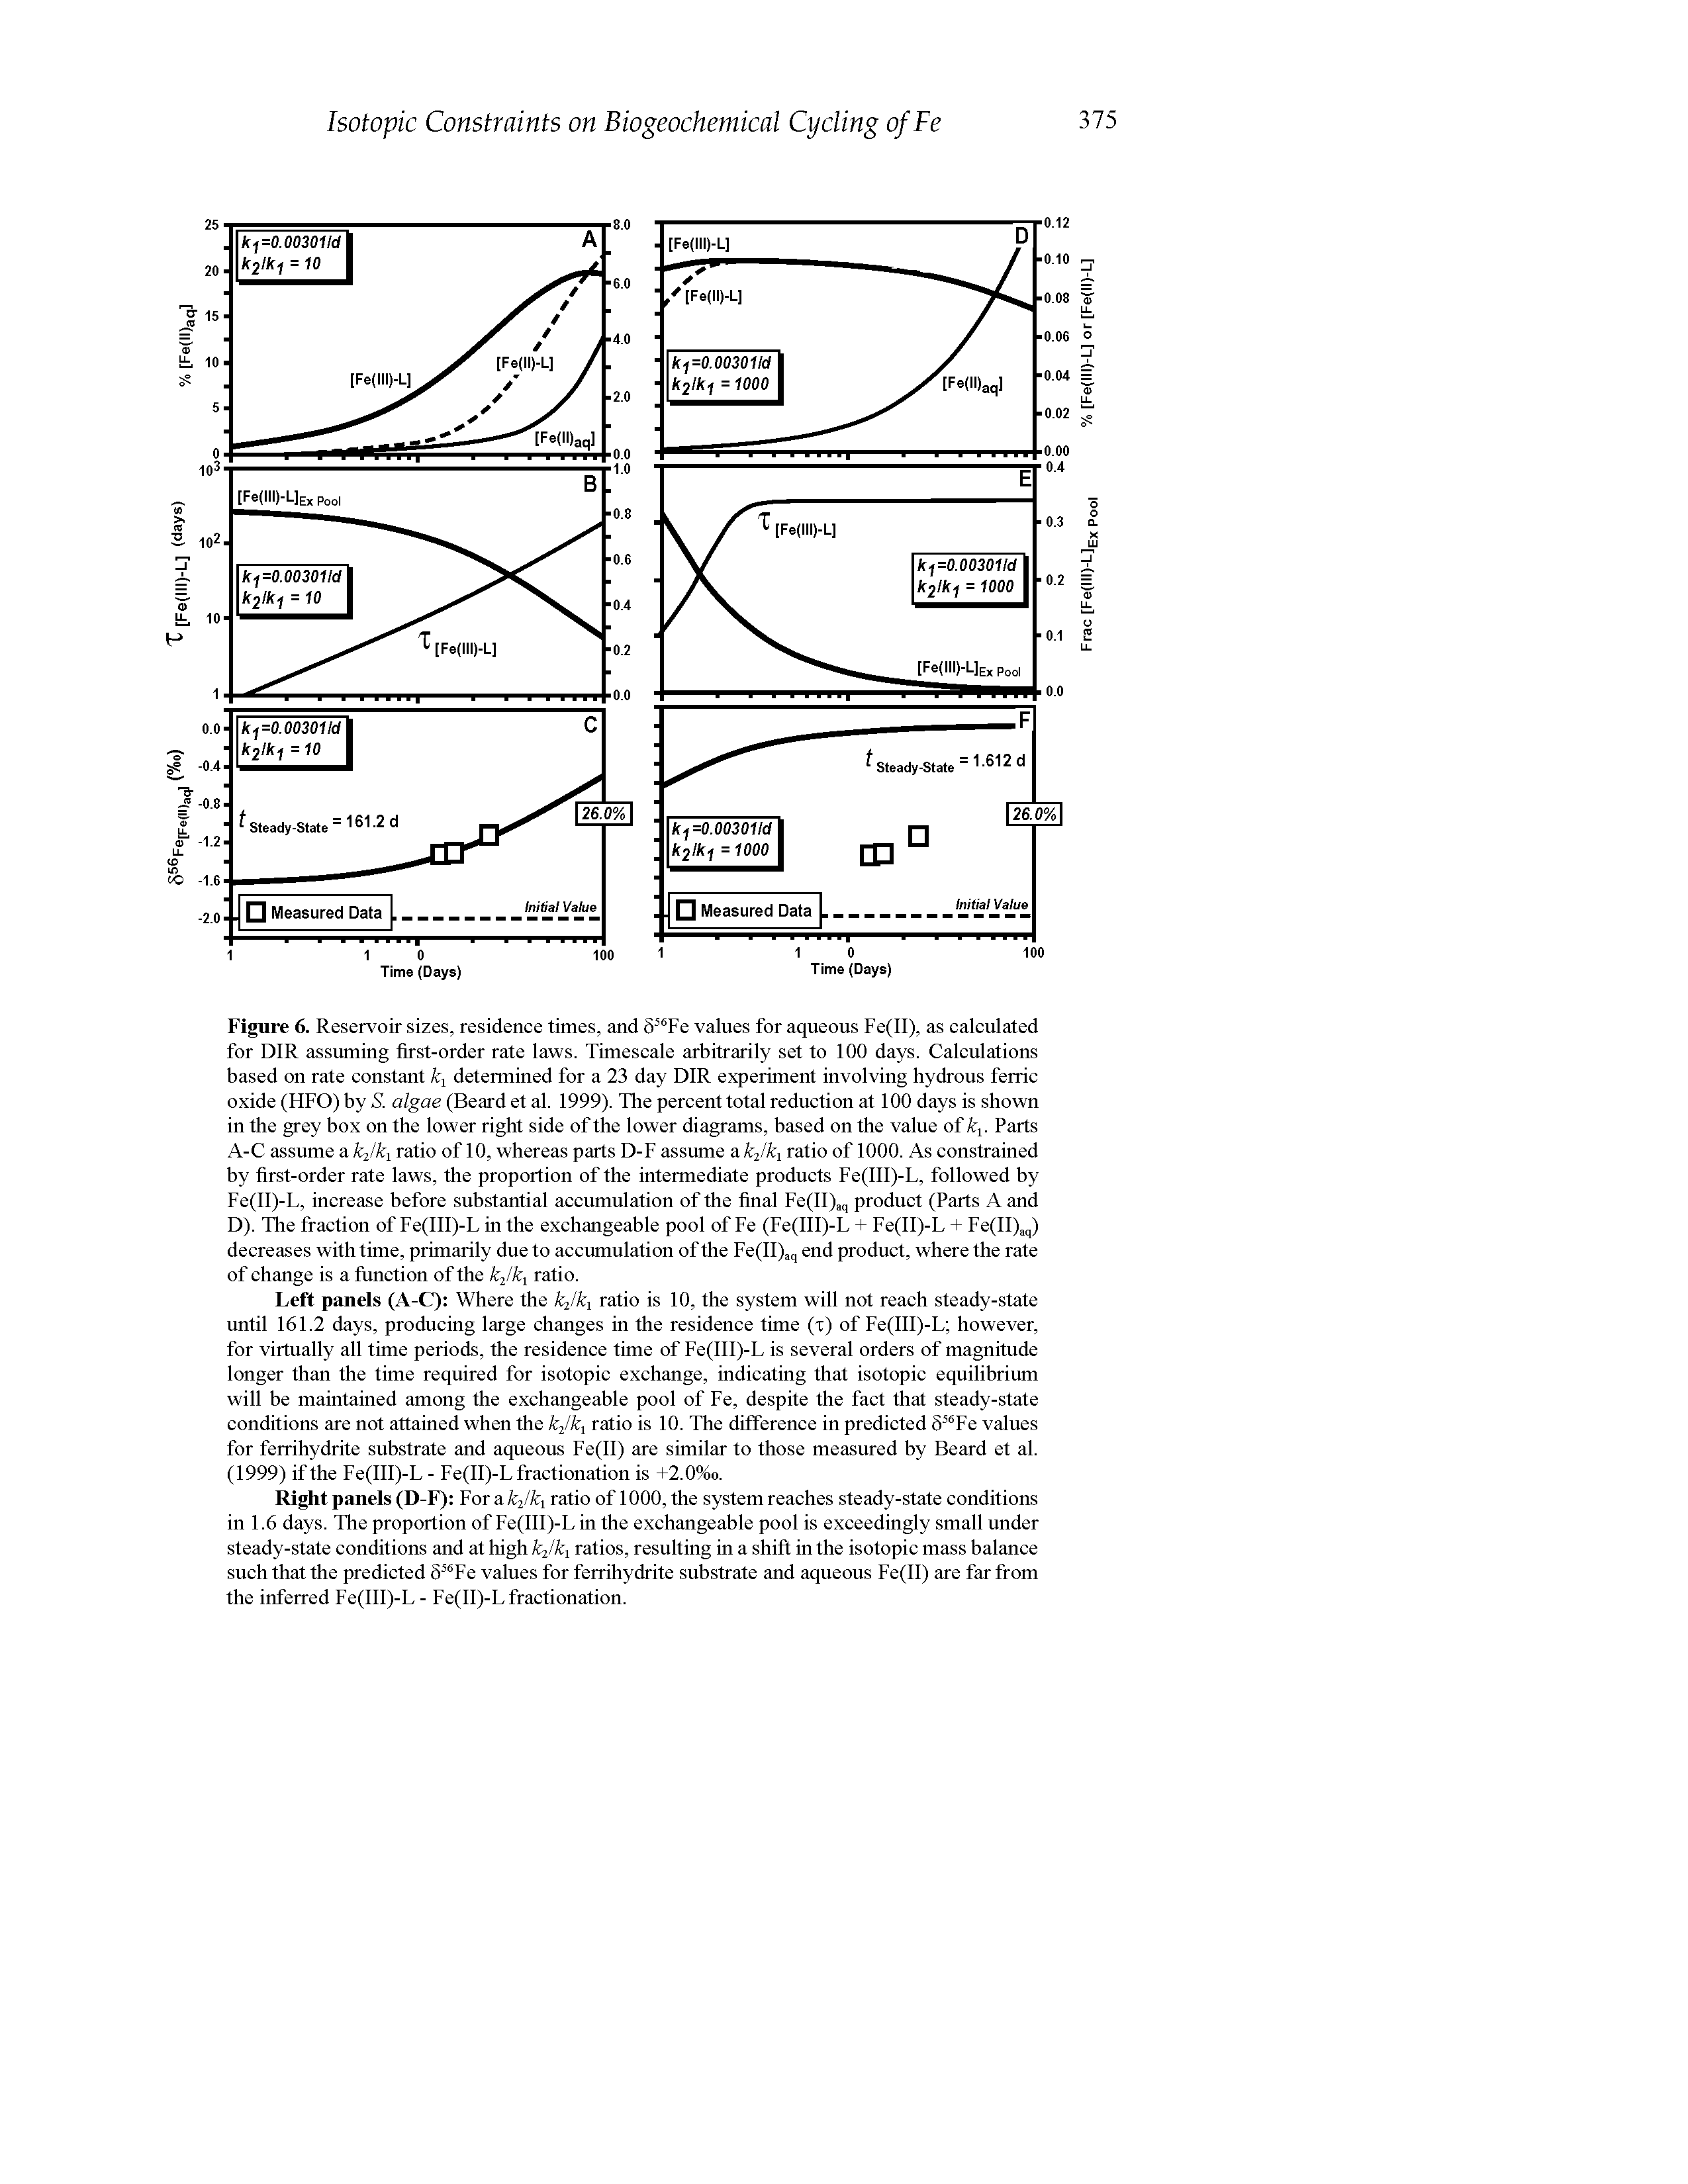 Figure 6. Reservoir sizes, residence times, and 5 Fe values for aqueous Fe(II), as calculated for DIR assuming first-order rate laws. Timescale arbitrarily set to 100 days. Calculations based on rate constant determined for a 23 day DIR experiment involving hydrous ferric oxide (HFO) by S. algae (Beard et al. 1999). The percent total reduction at 100 days is shown in the grey box on the lower right side of the lower diagrams, based on the value of k. Parts A-C assume a 2/ 1 ratio of 10, whereas parts D-F assume Bikjki ratio of 1000. As constrained by first-order rate laws, the proportion of the intermediate products Fe(III)-L, followed by Fe(II)-L, increase before substantial accumulation of the final Fe(II)aq product (Parts A and D). Tlie fraction of Fe(III)-L in the exchangeable pool of Fe (Fe(III)-L + Fe(II)-L + Fe(II)aq) decreases with time, primarily due to accumulation of the Fe(II)aq end product, where the rate of change is a function of the kjk ratio.